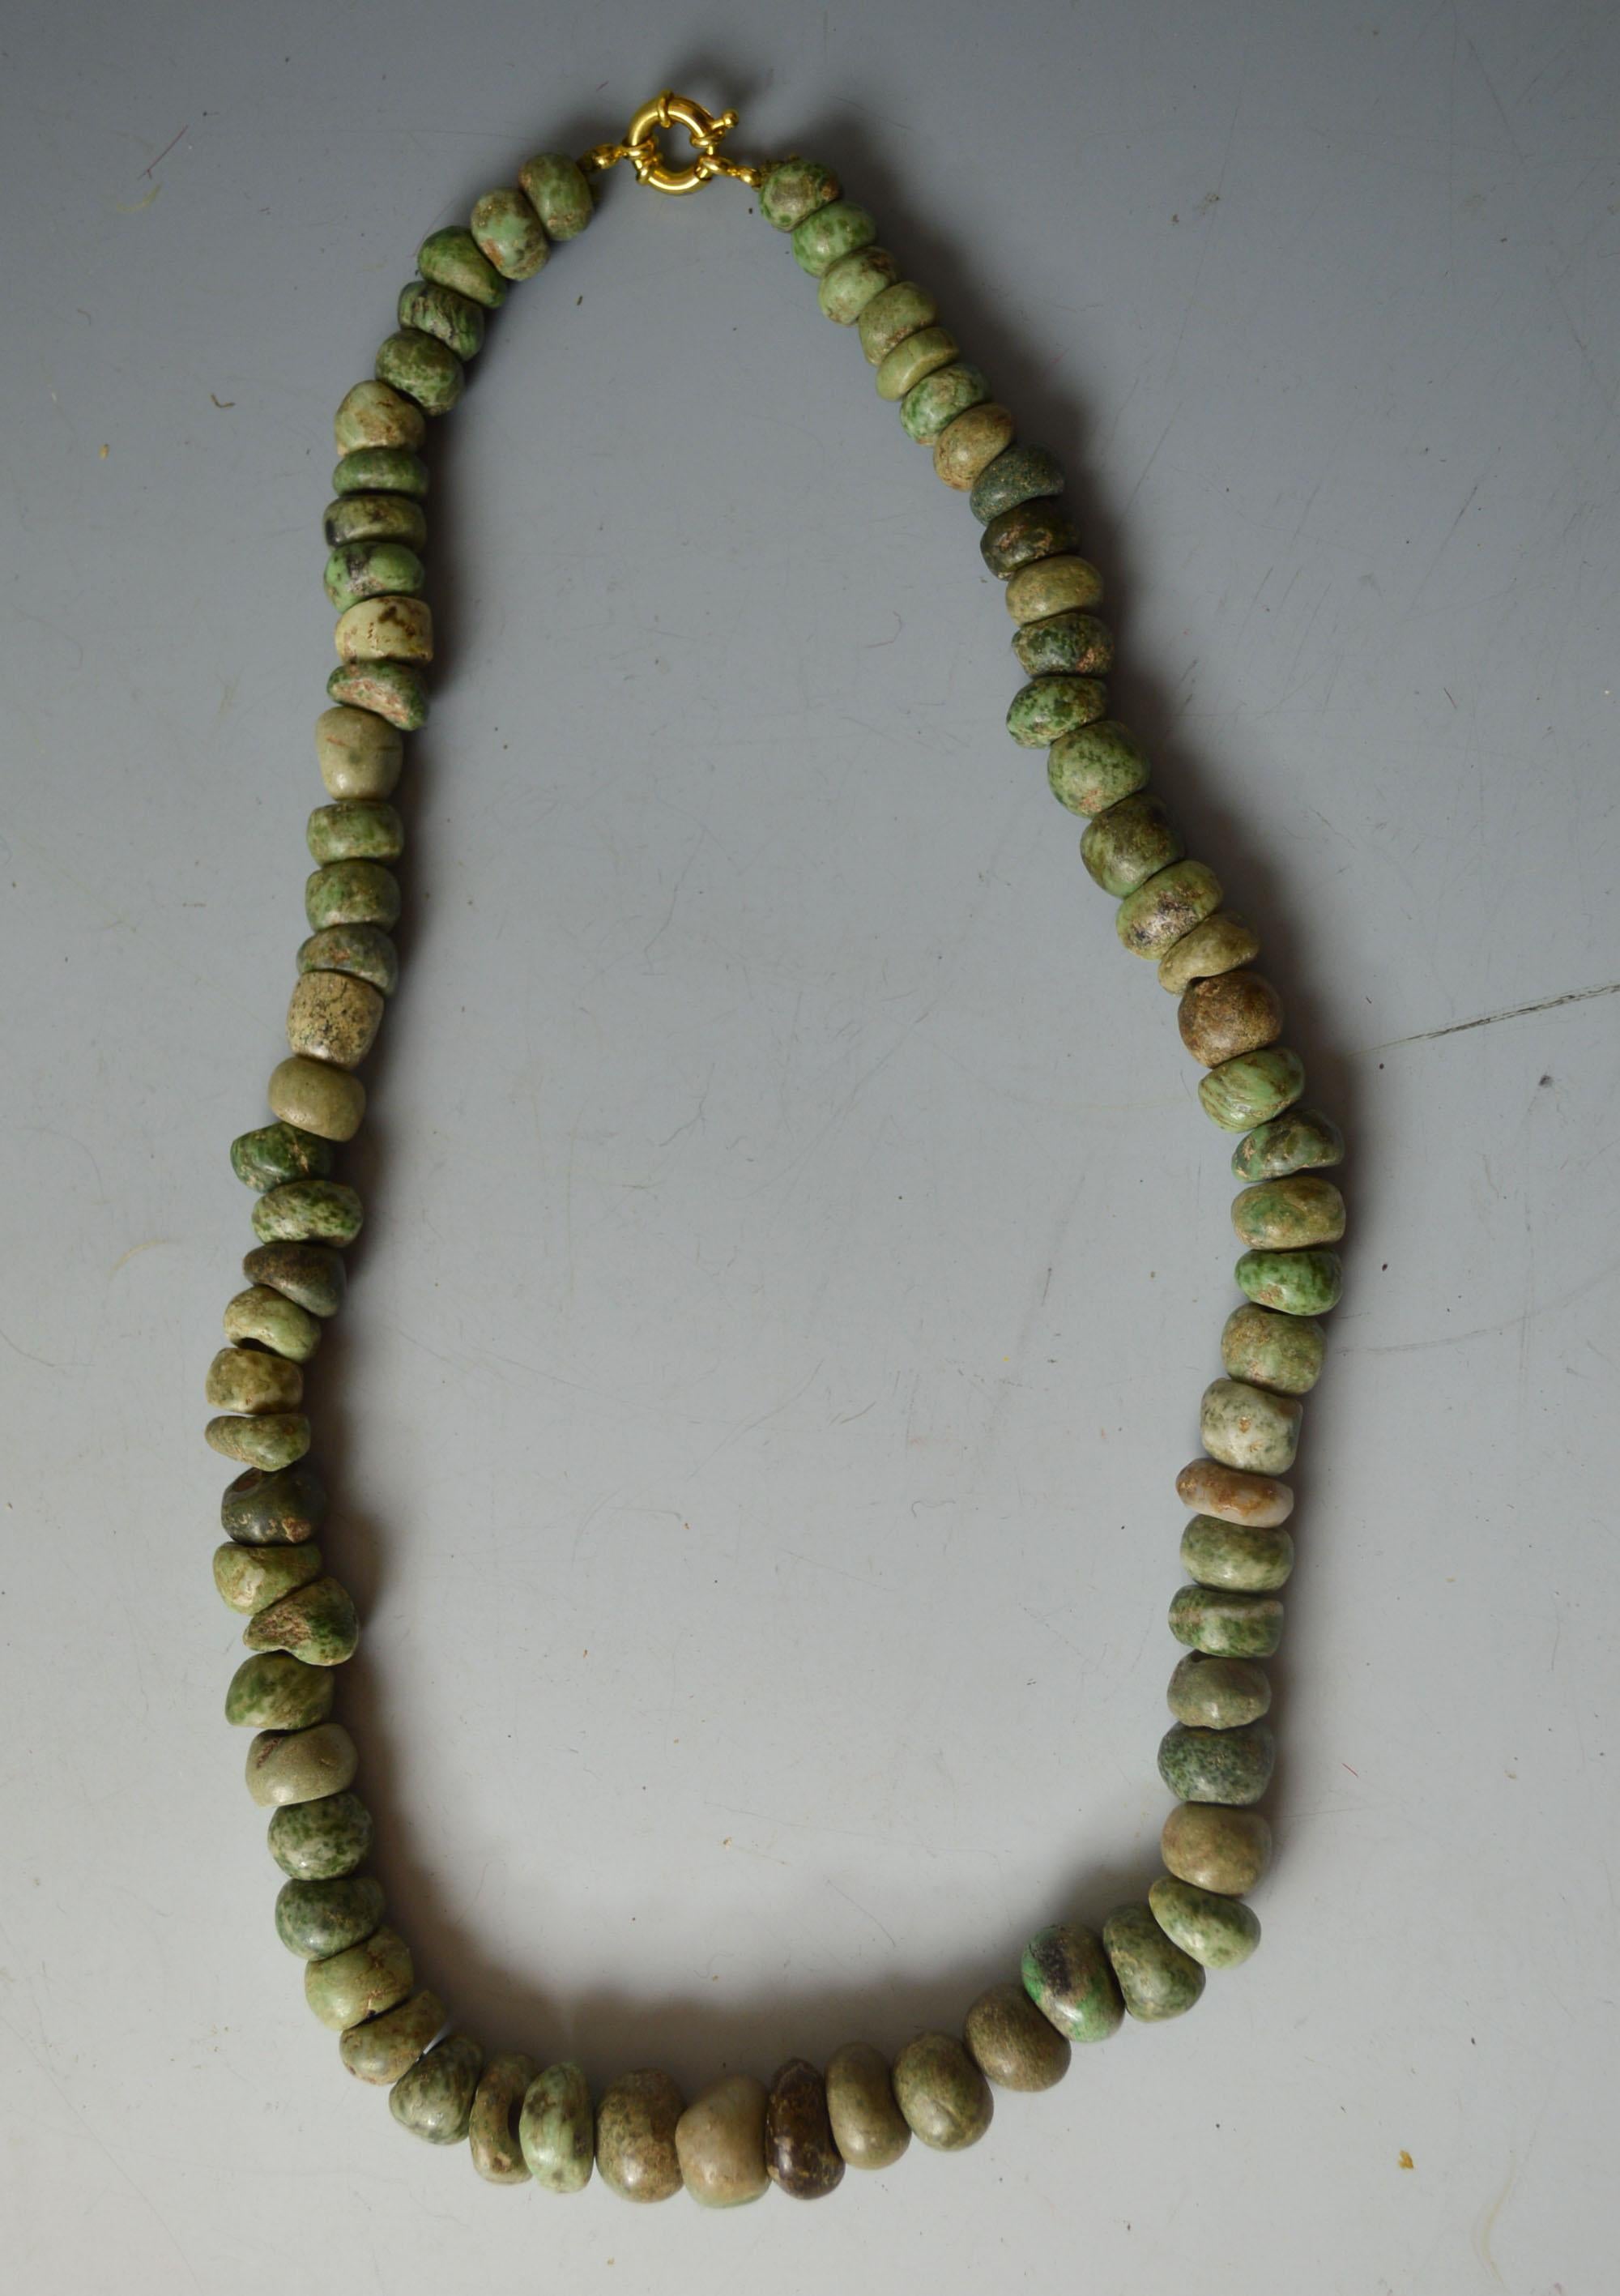 A Pre Columbian ancient Mexico Maya Jadeite necklace, circa 600–1200 AD

A fine Jadeite beaded necklace in light green jadeite 
Yucatan peninsula region Mexico
Overall length 23 inches 59 cm bead sizes 1 - 1.5 cm approx
Condition: good
Ex UK